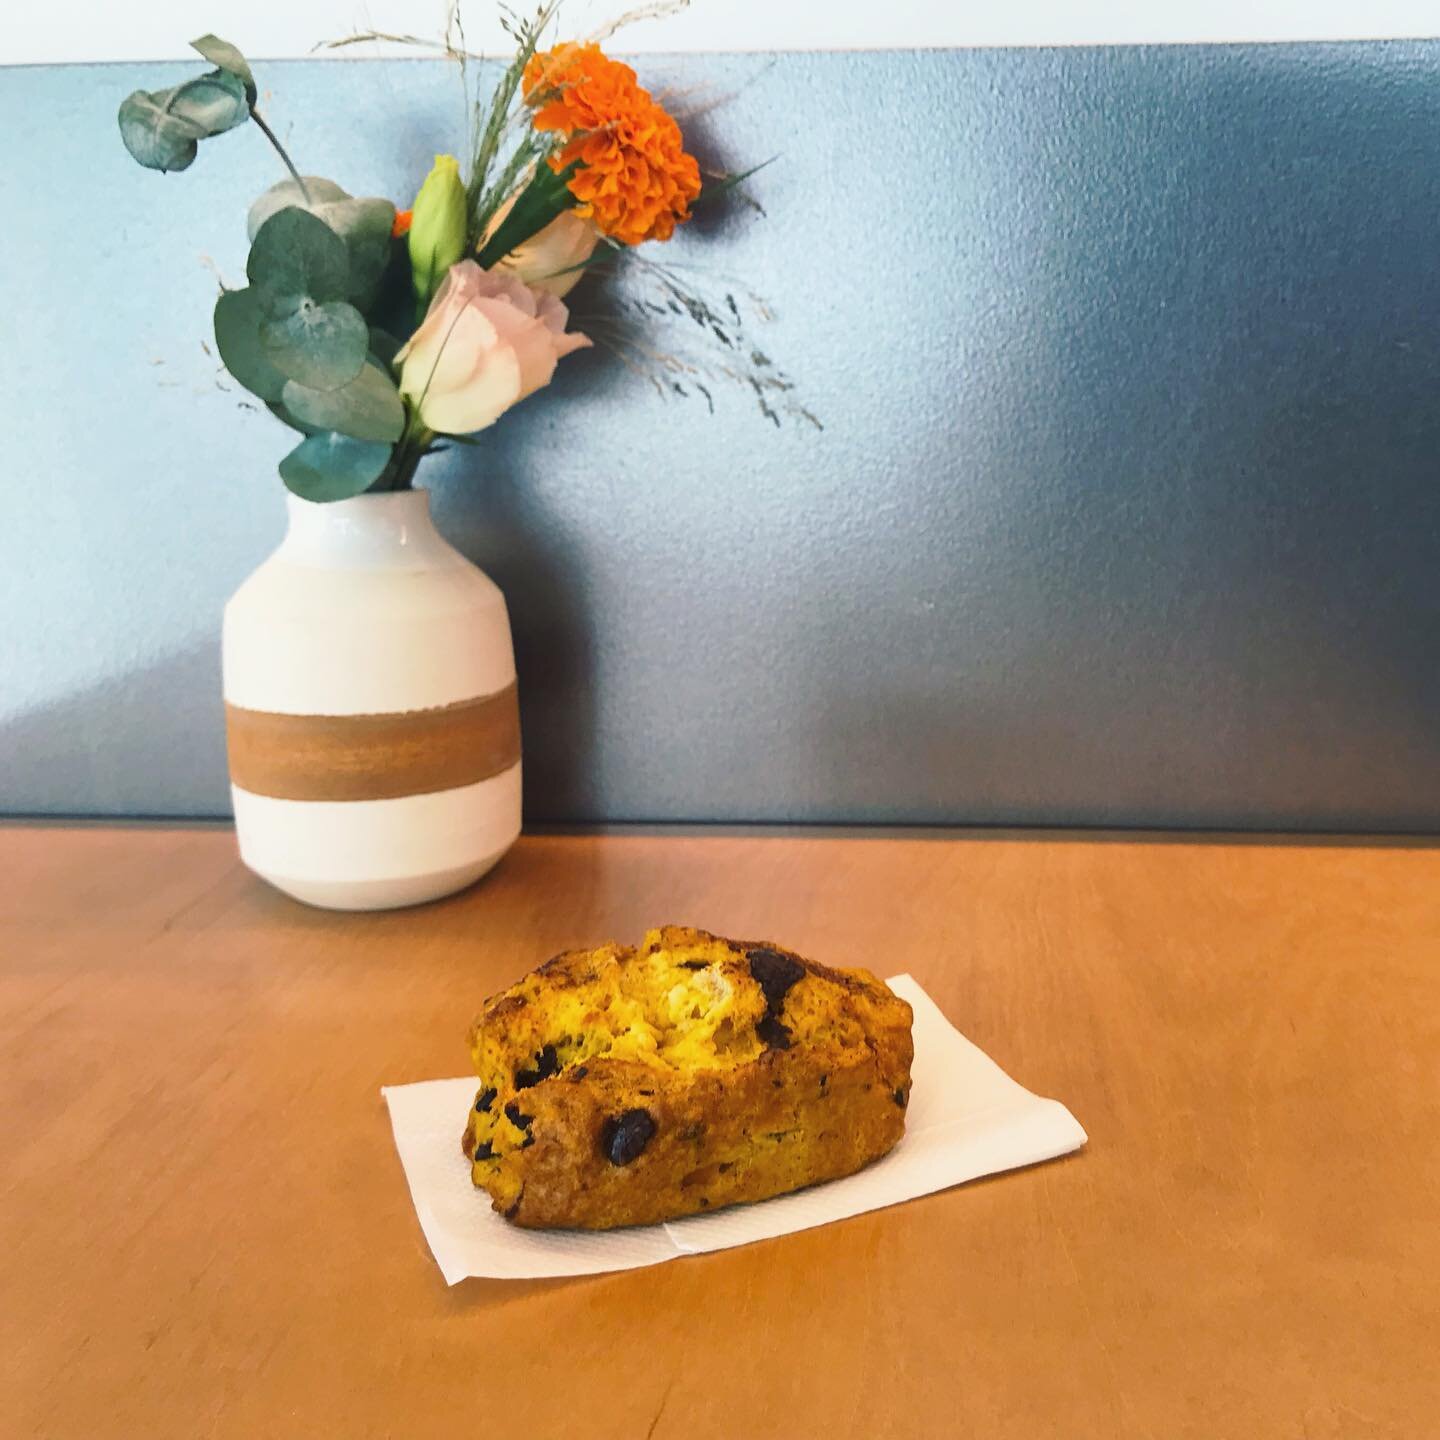 Greetings, people of Scone-Francisco! 👽✌️ Here we go with another no holds barred review of that lovely, crumbly mistress we call the scone.

Pumpkin chocolate scone from @andytownsf.
____________________________

Rating: 7.5/10

Price: $3.50ish
___